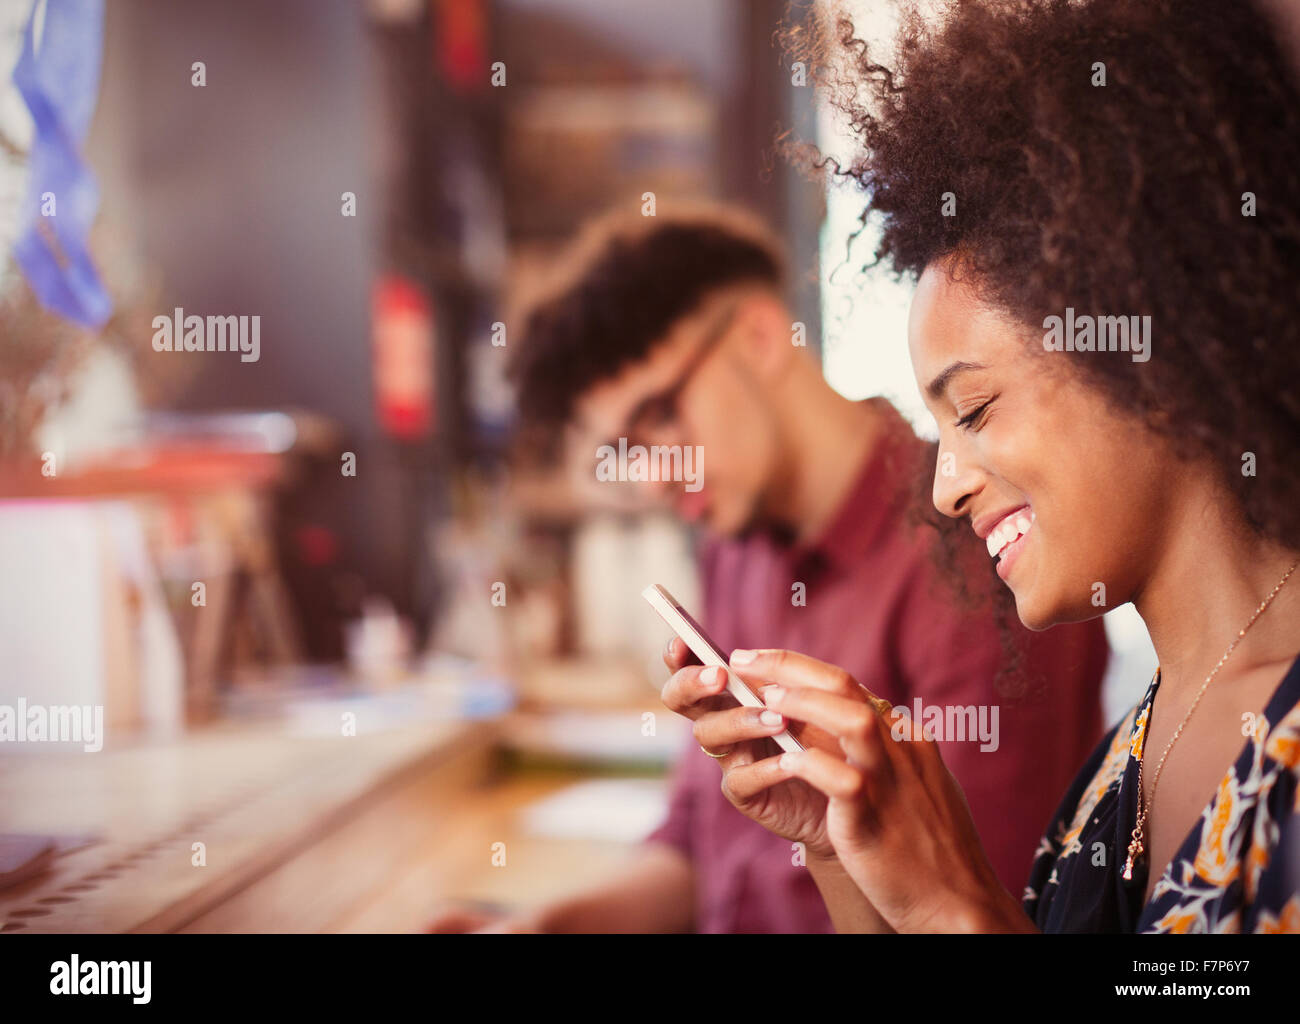 Smiling woman texting with cell phone Banque D'Images